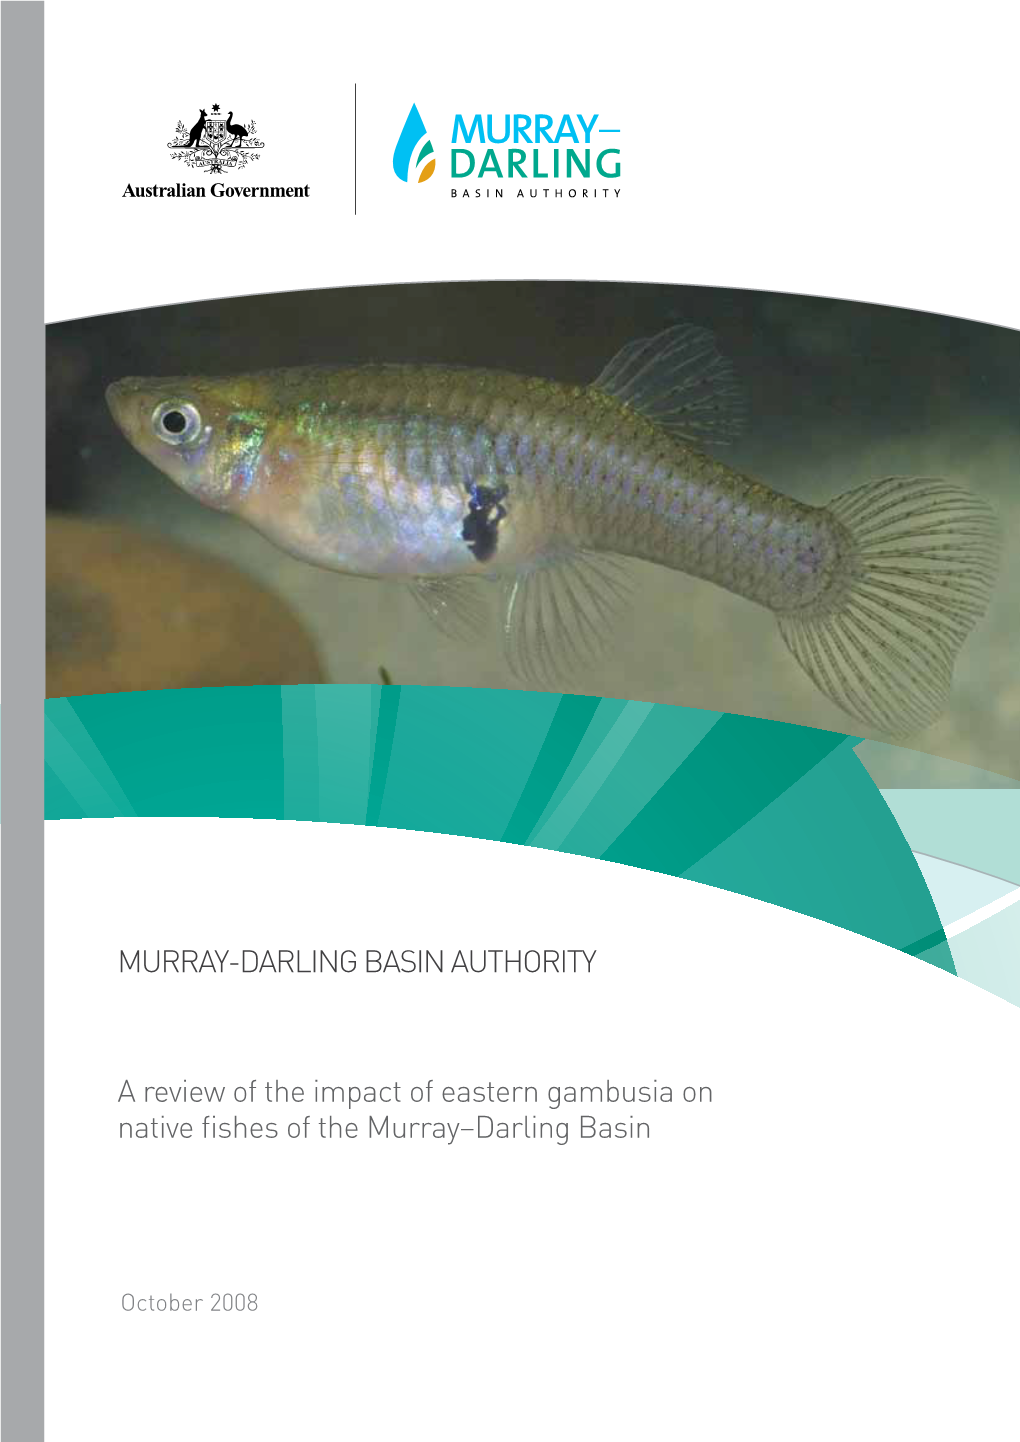 Review of the Impact of Eastern Gambusia on Native Fishes of the Murray–Darling Basin